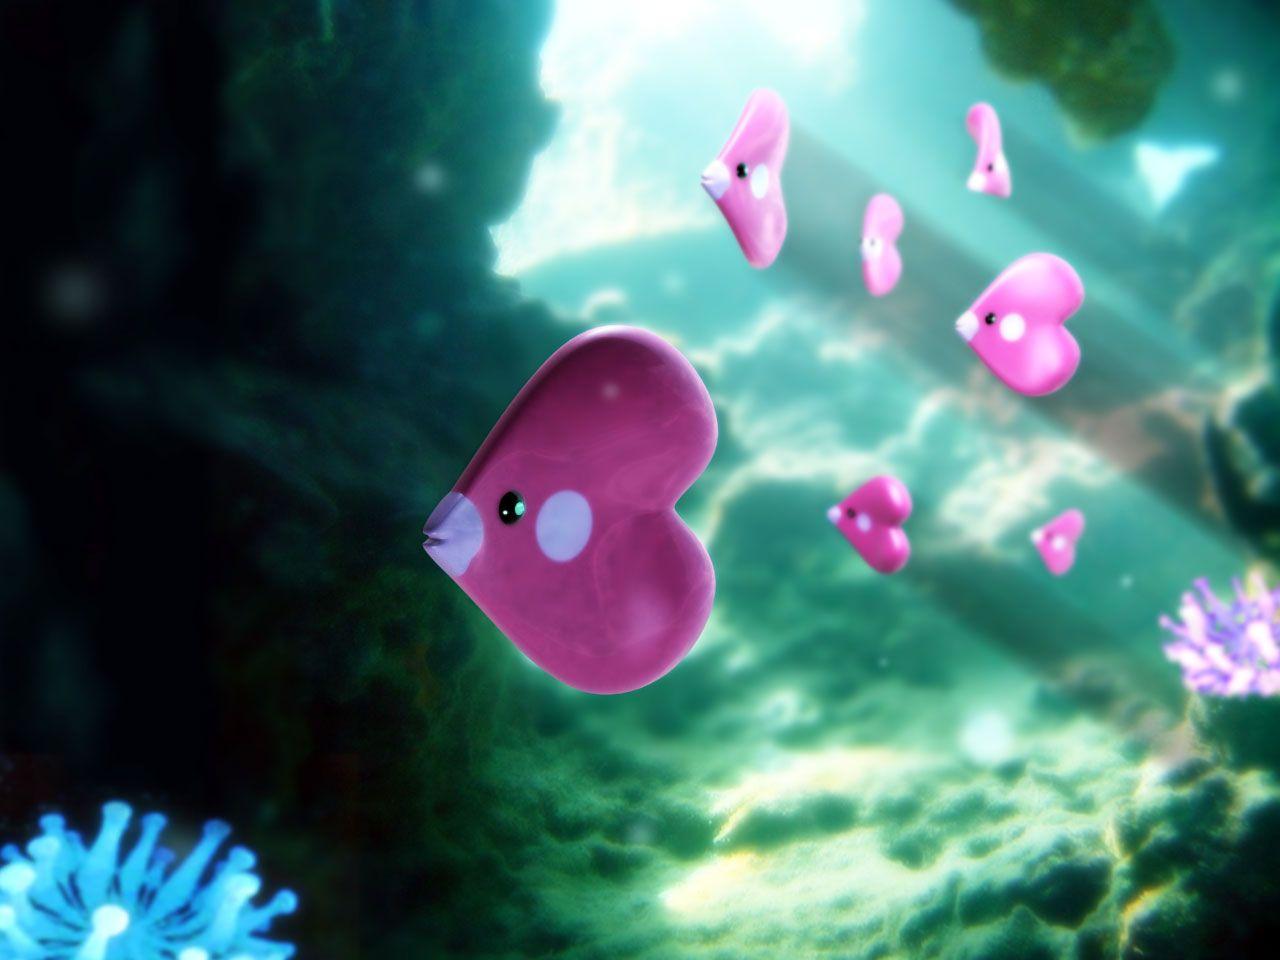 Luvdisc Hd Wallpapers